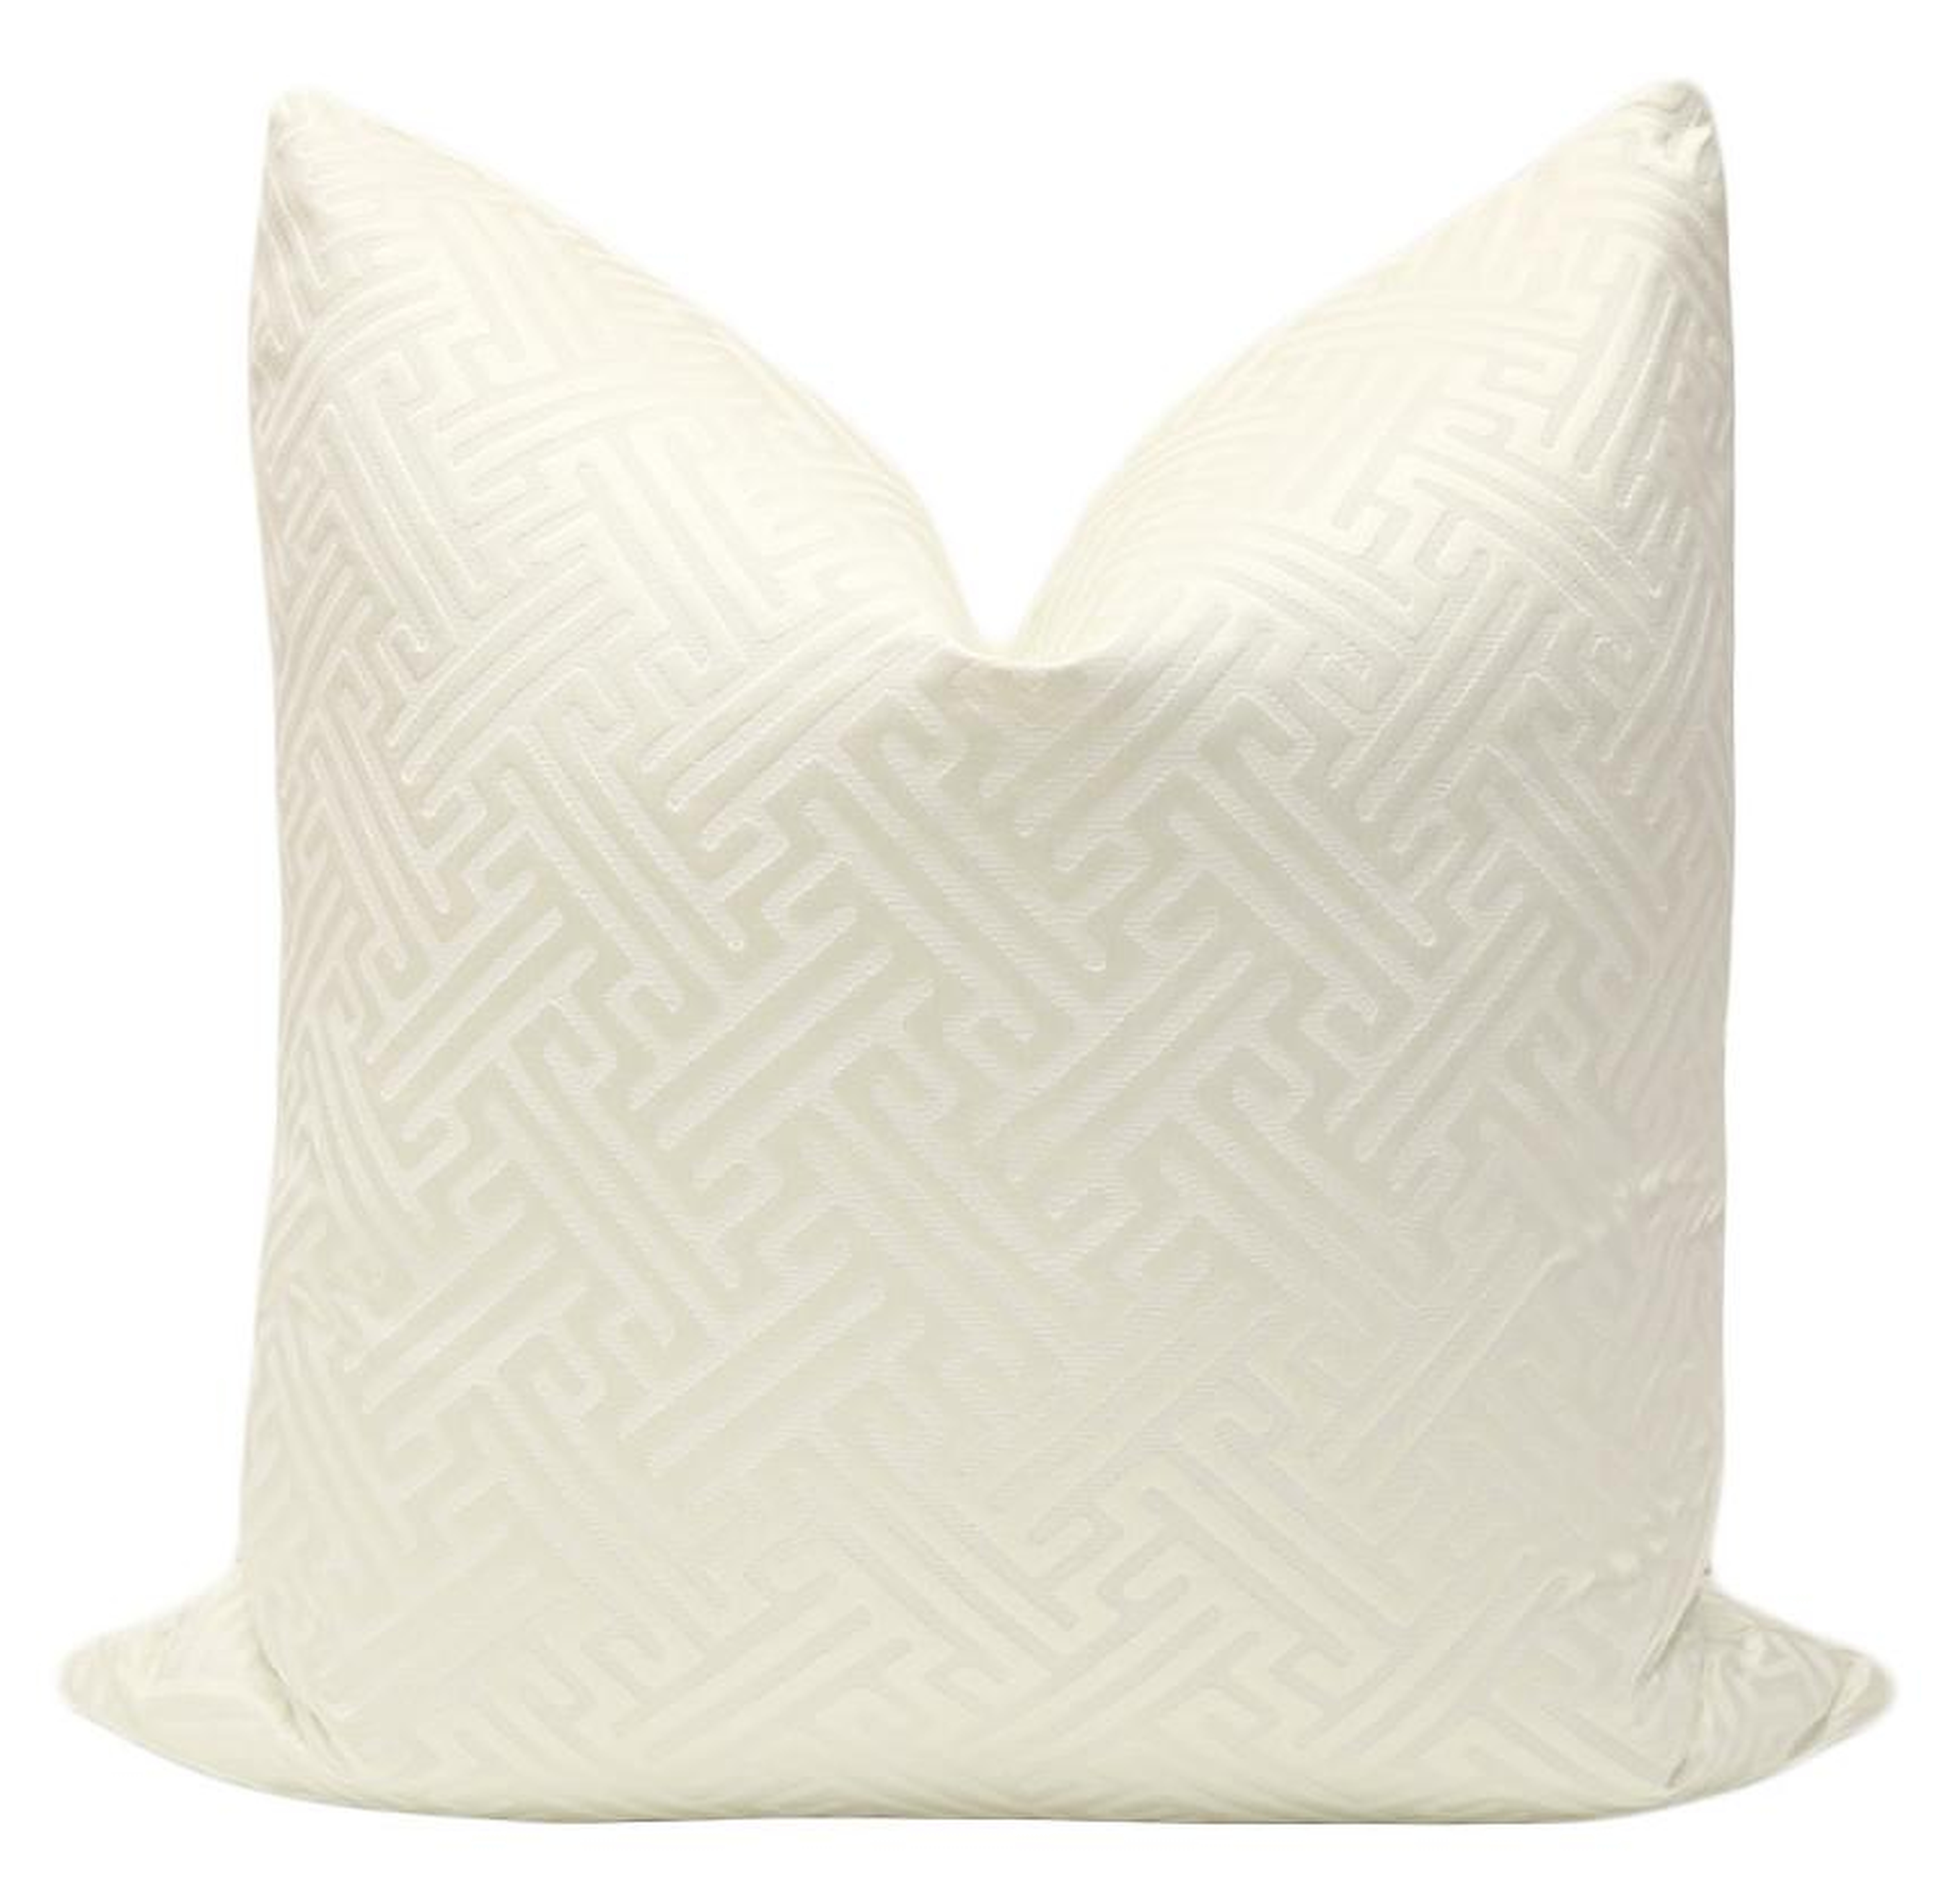 Grecian Key // Alabaster, 20" Pillow Cover - Little Design Company